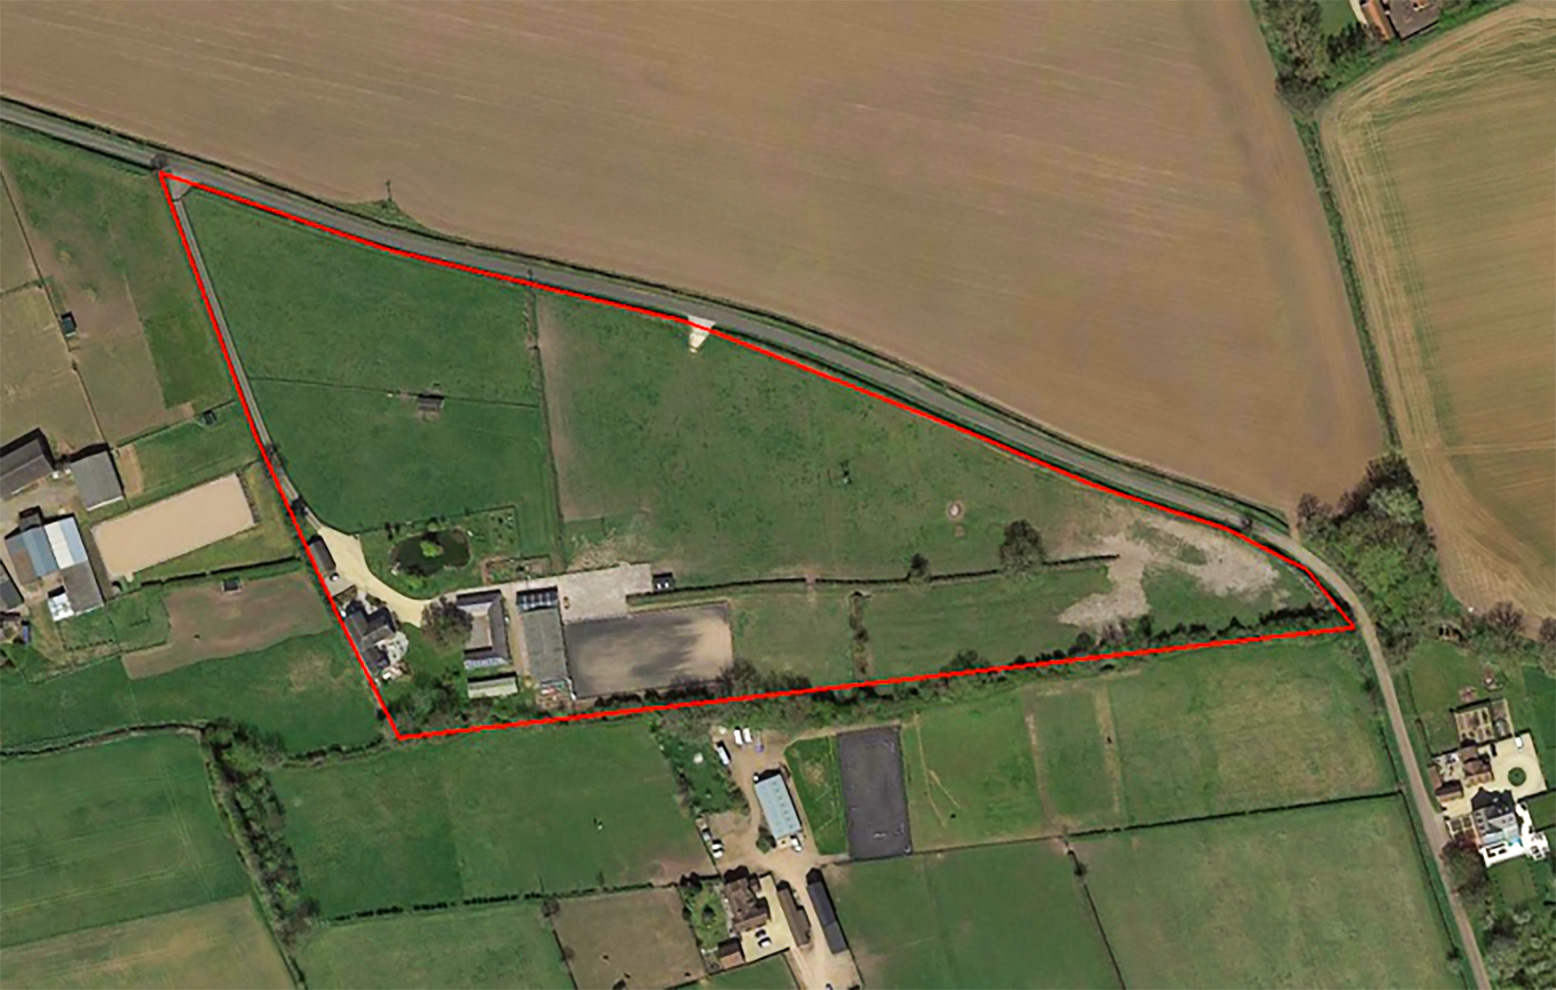 Aerial photographic view of the site area, shows many green fields, then a horizontal triangle with a red outline in the middle marking the area